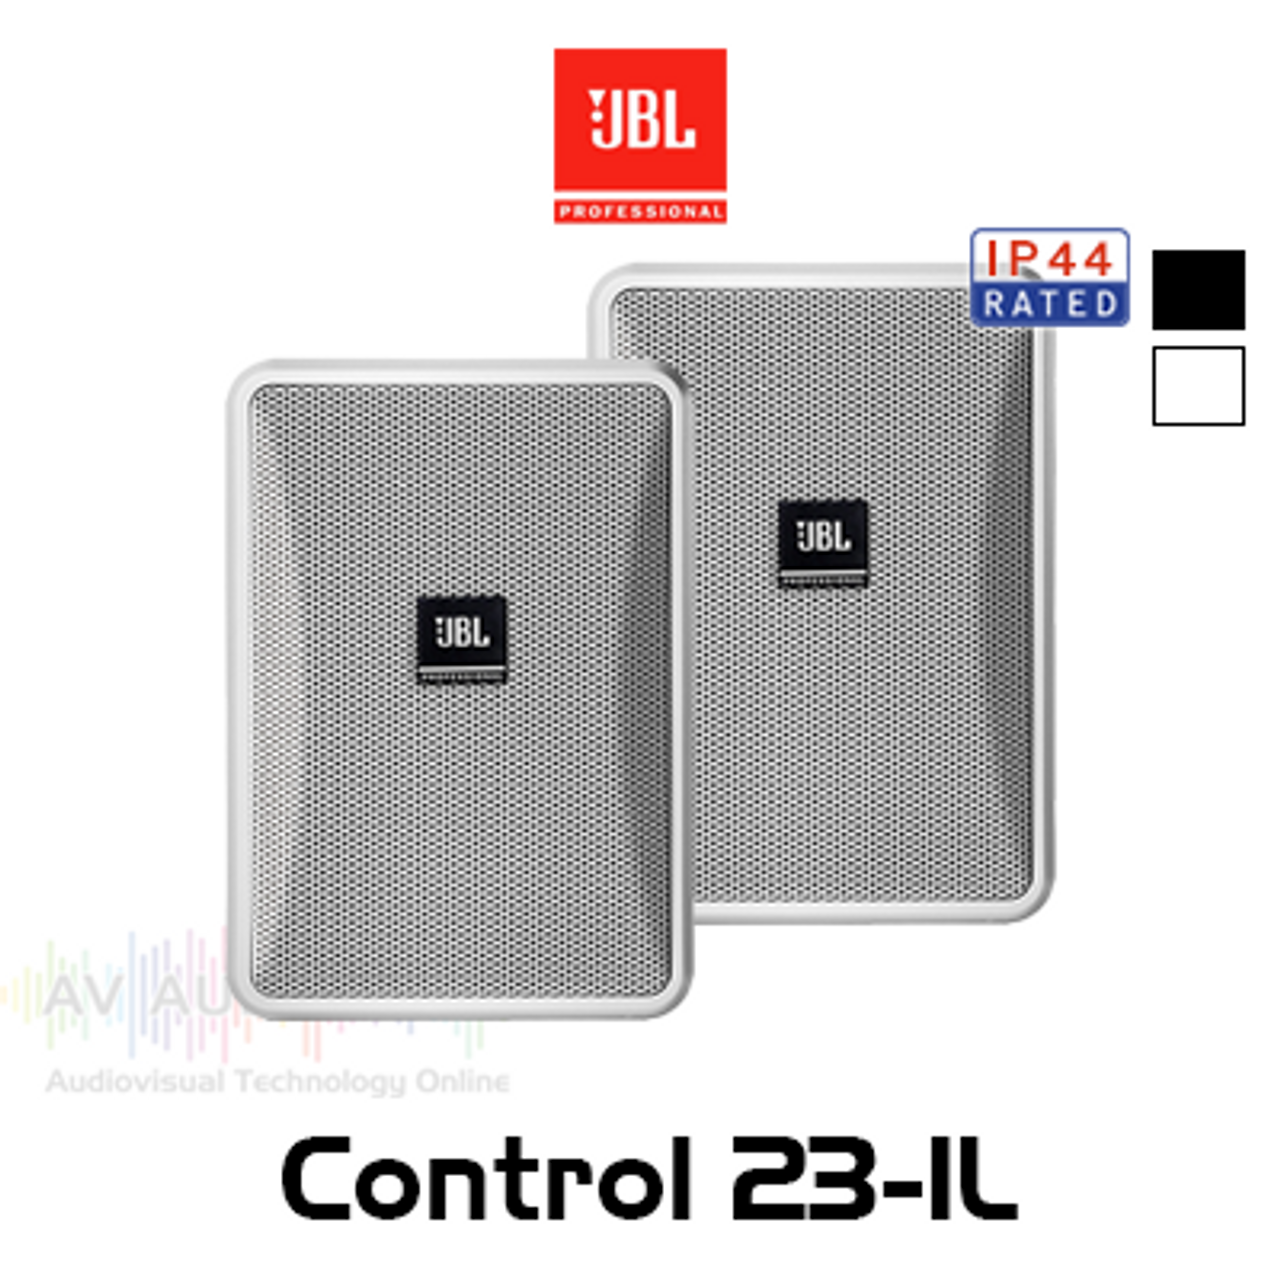 JBL Control 23-1L 3" 8 ohm Background/Foreground Ultra Compact Outdoor Speakers (Pair)